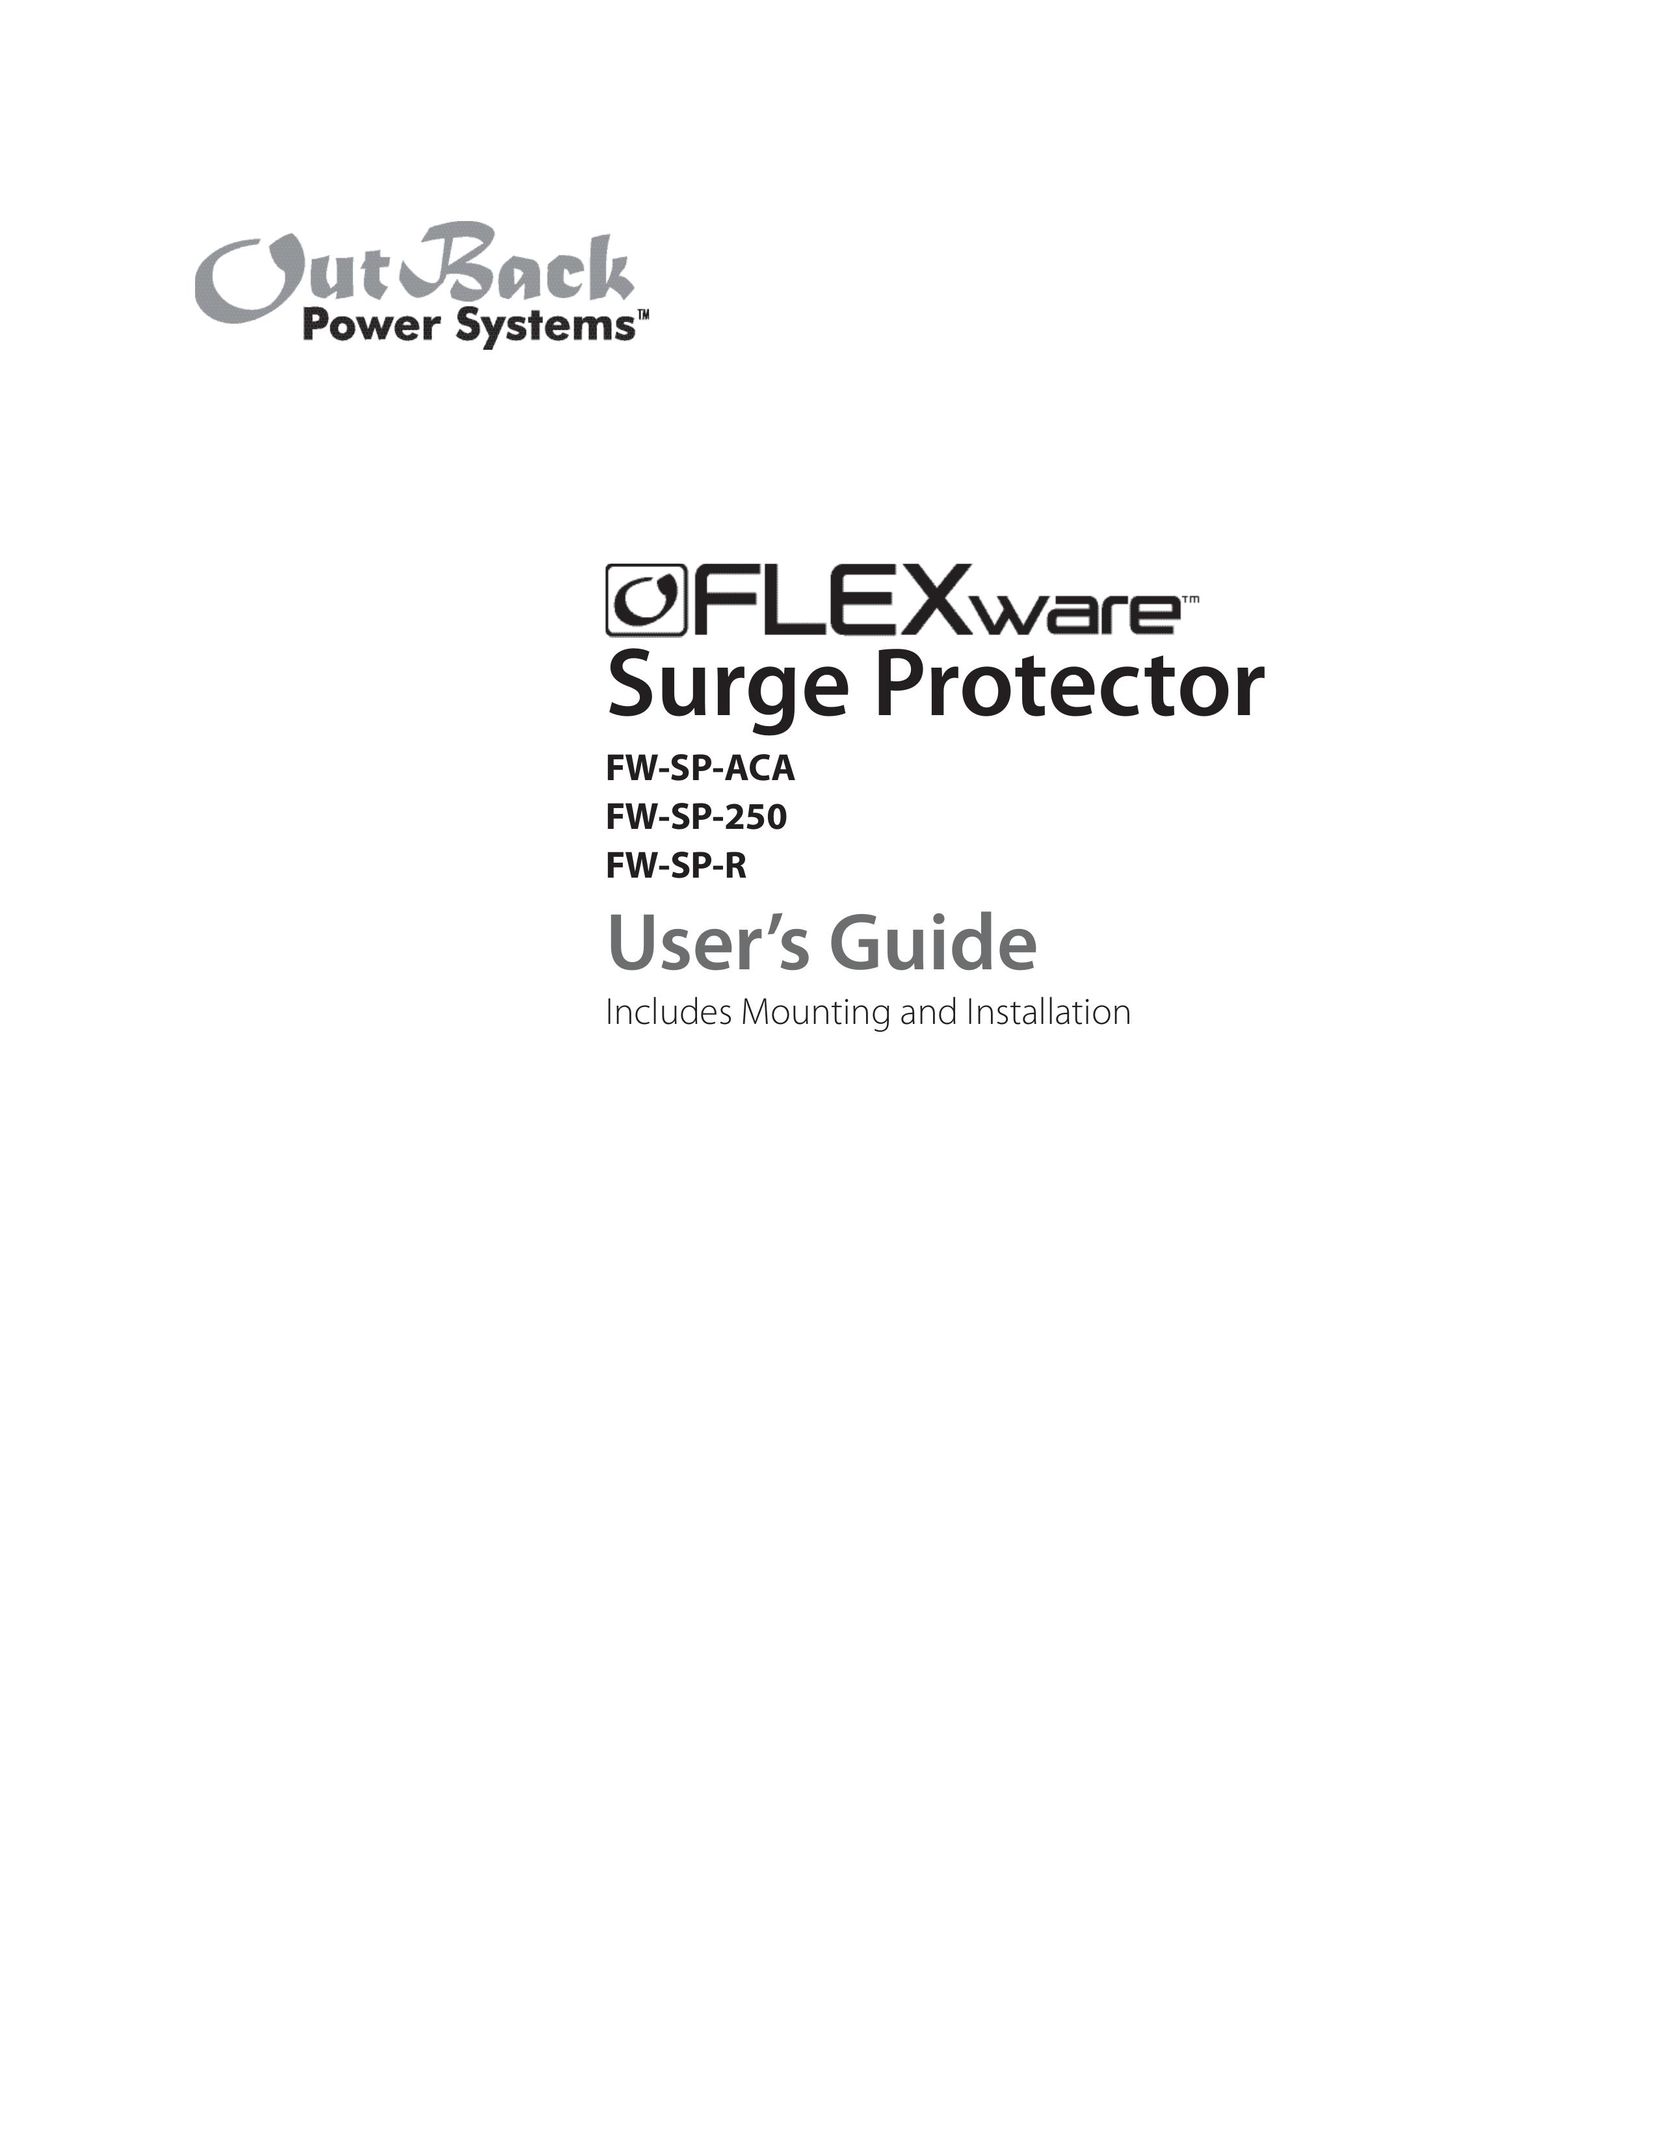 Outback Power Systems FW-SP-ACA Surge Protector User Manual